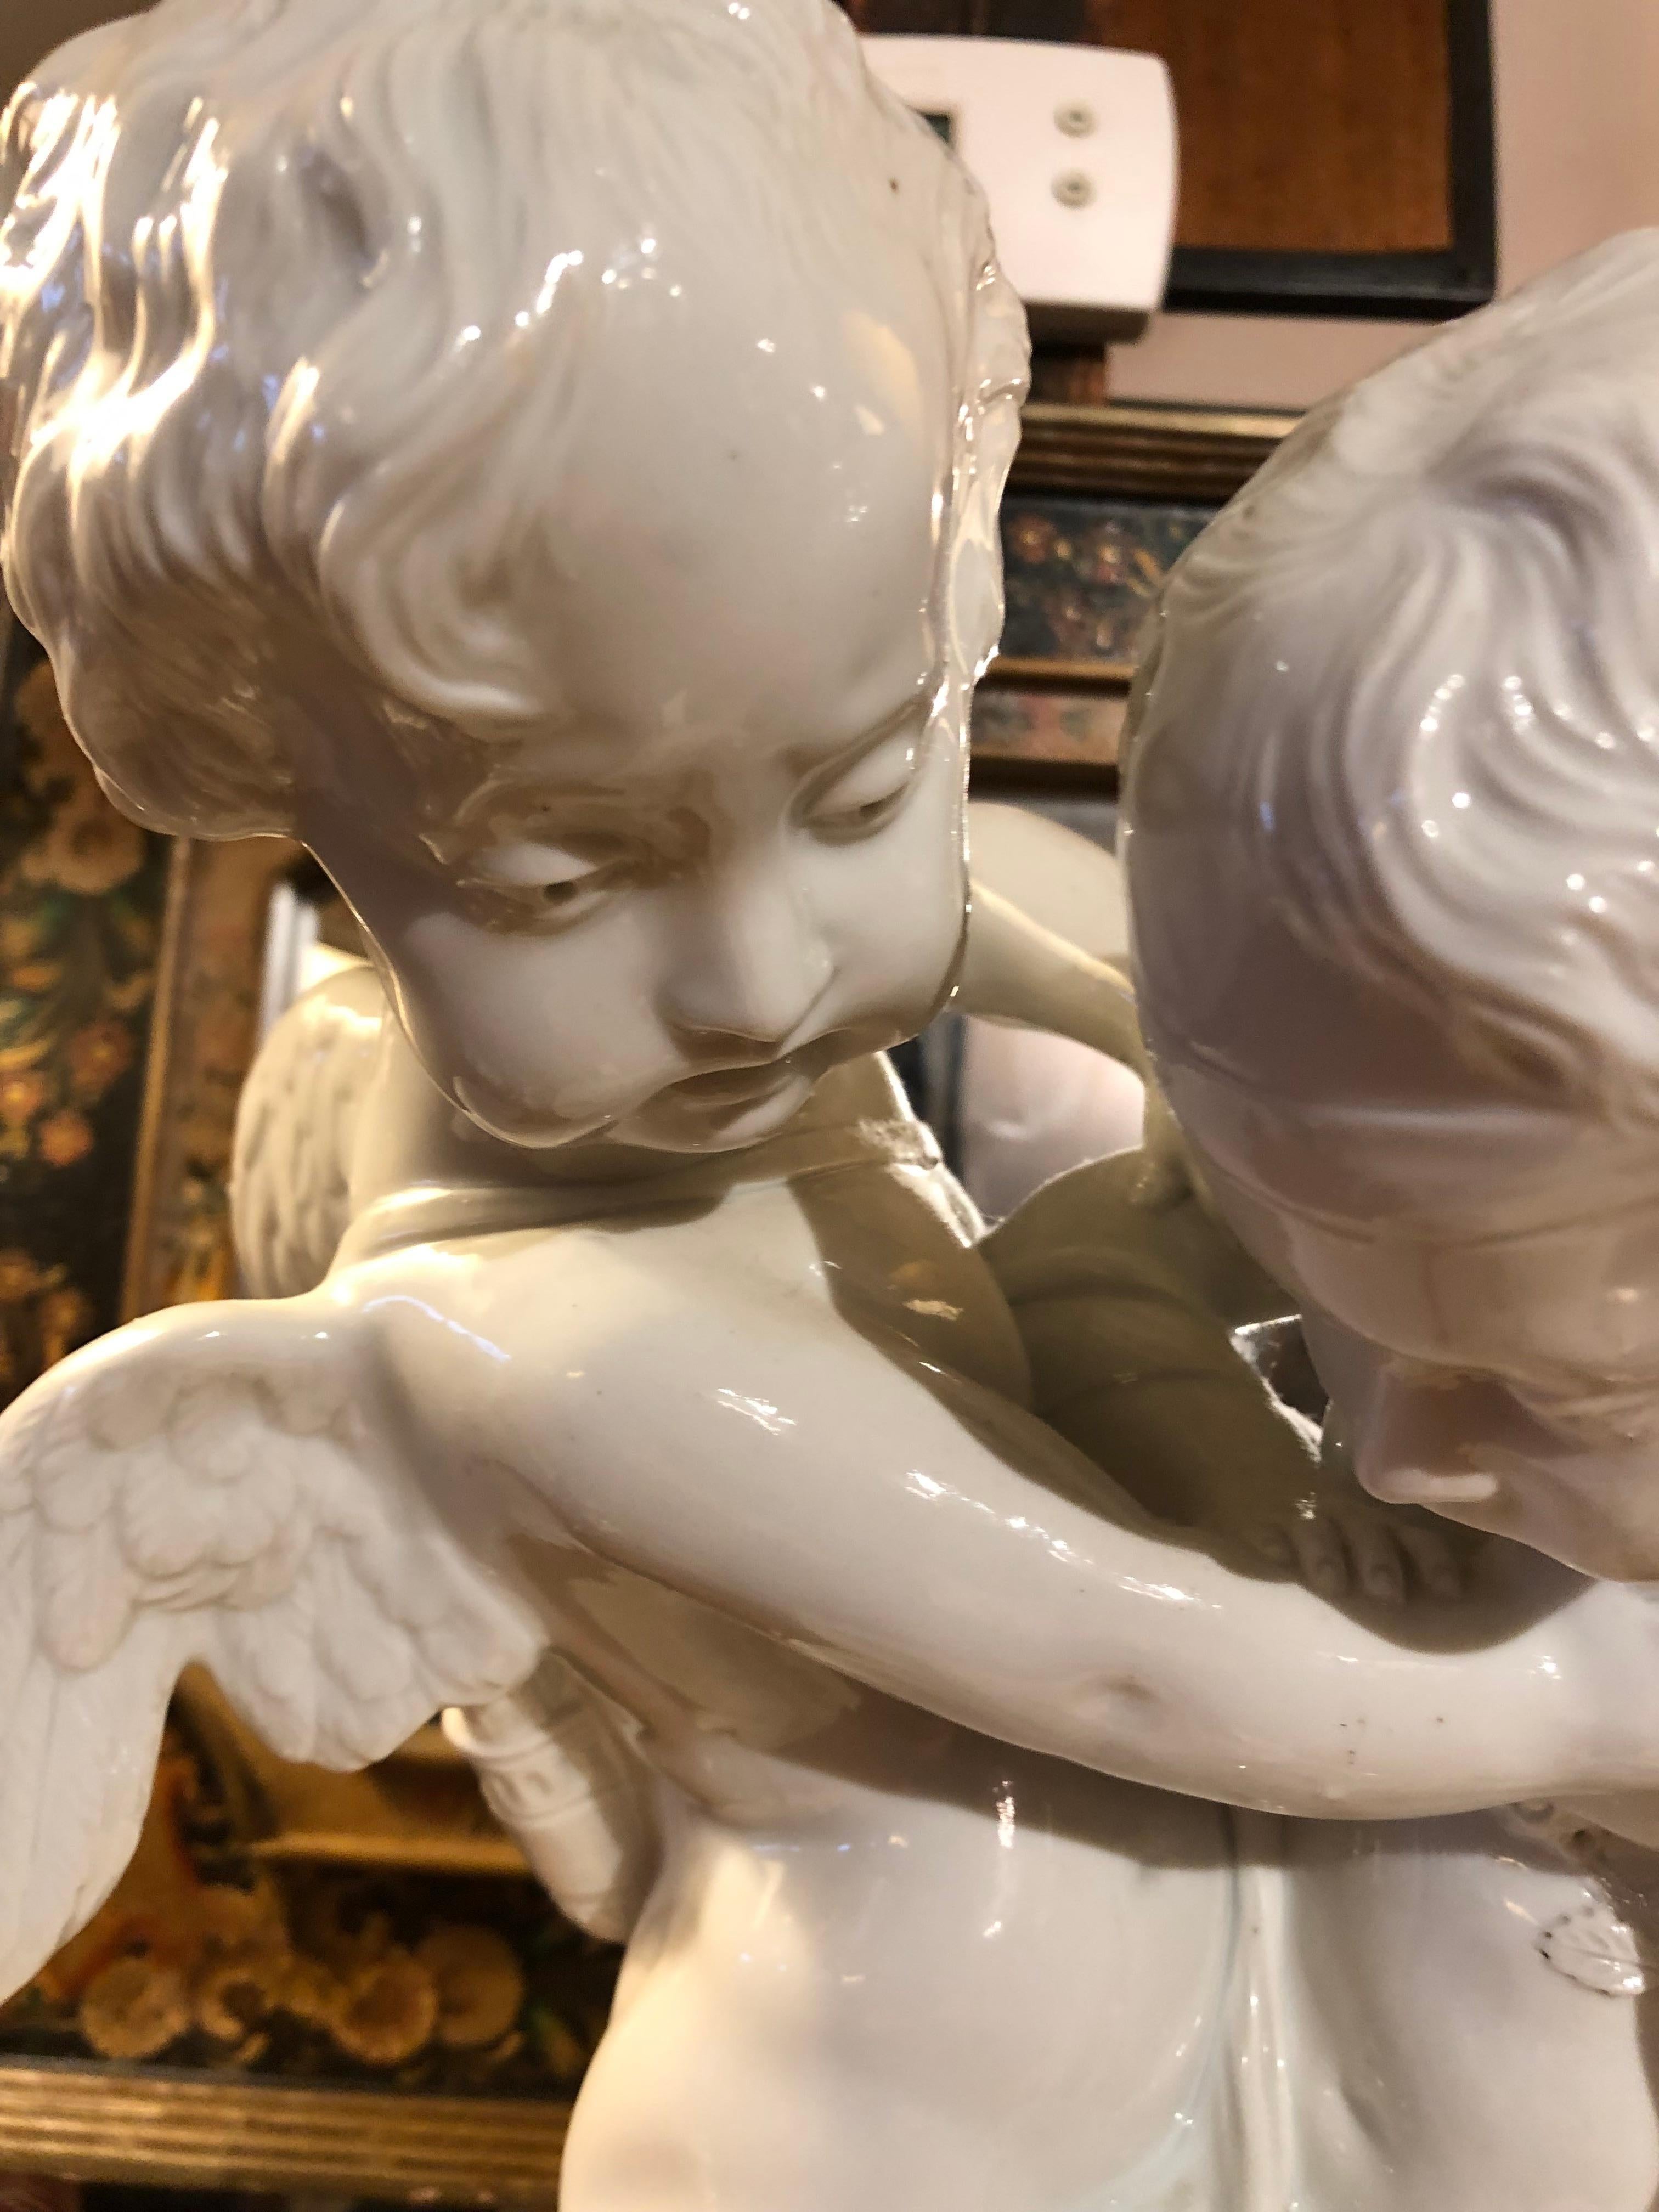 Large white porcelain sculpture of two cherubs caught in a lovely pose and having amazing details.